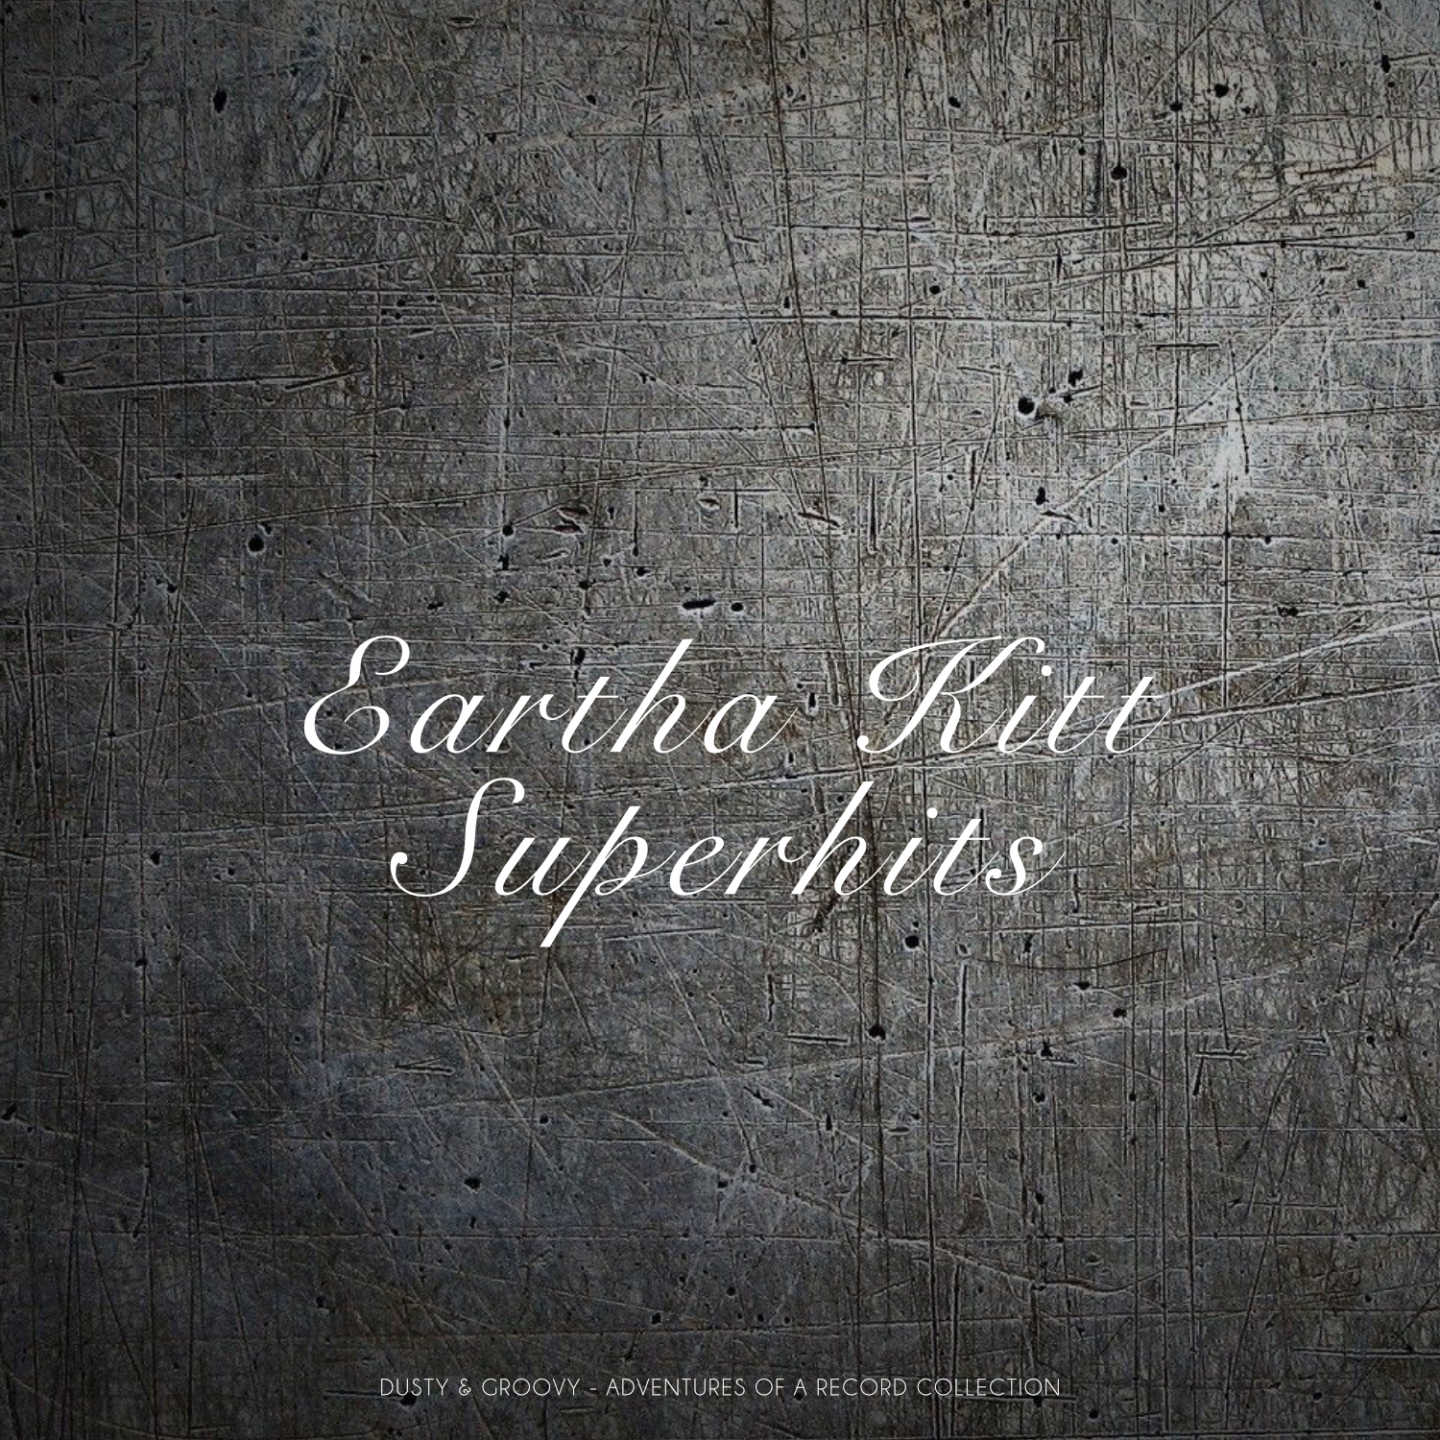 Eartha Kitt Superhits (Dusty & Groovy - Adventures Of A Record Collection)